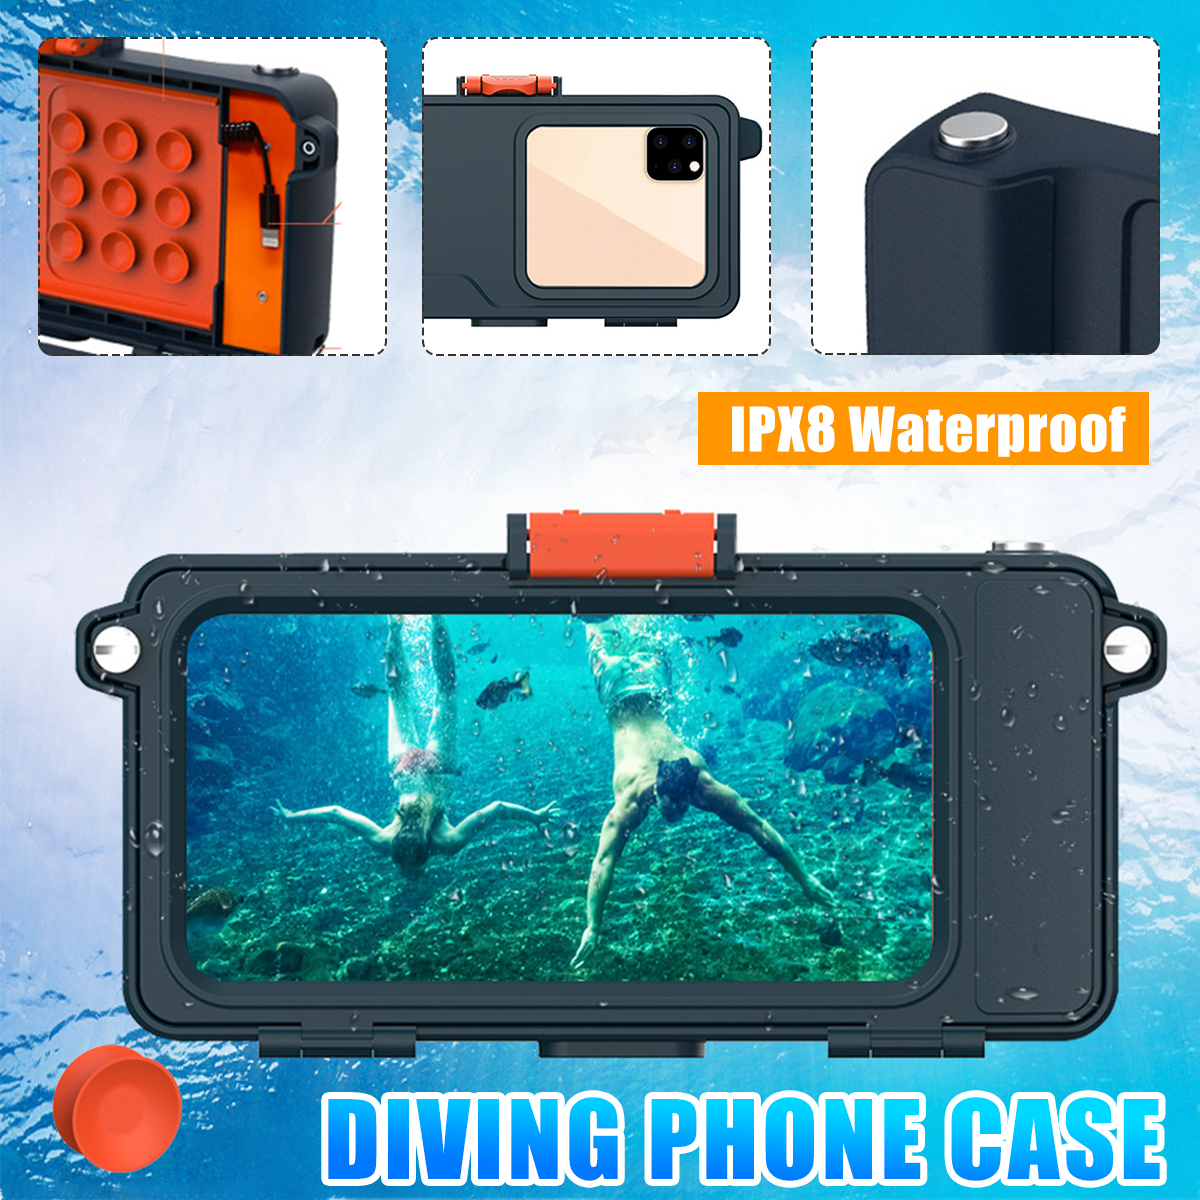 Bakeey-67-inch-Professional-IP68-Waterproof-Mobile-Phone-Case-with-Transparent-Window-Take-Picture-S-1855617-2